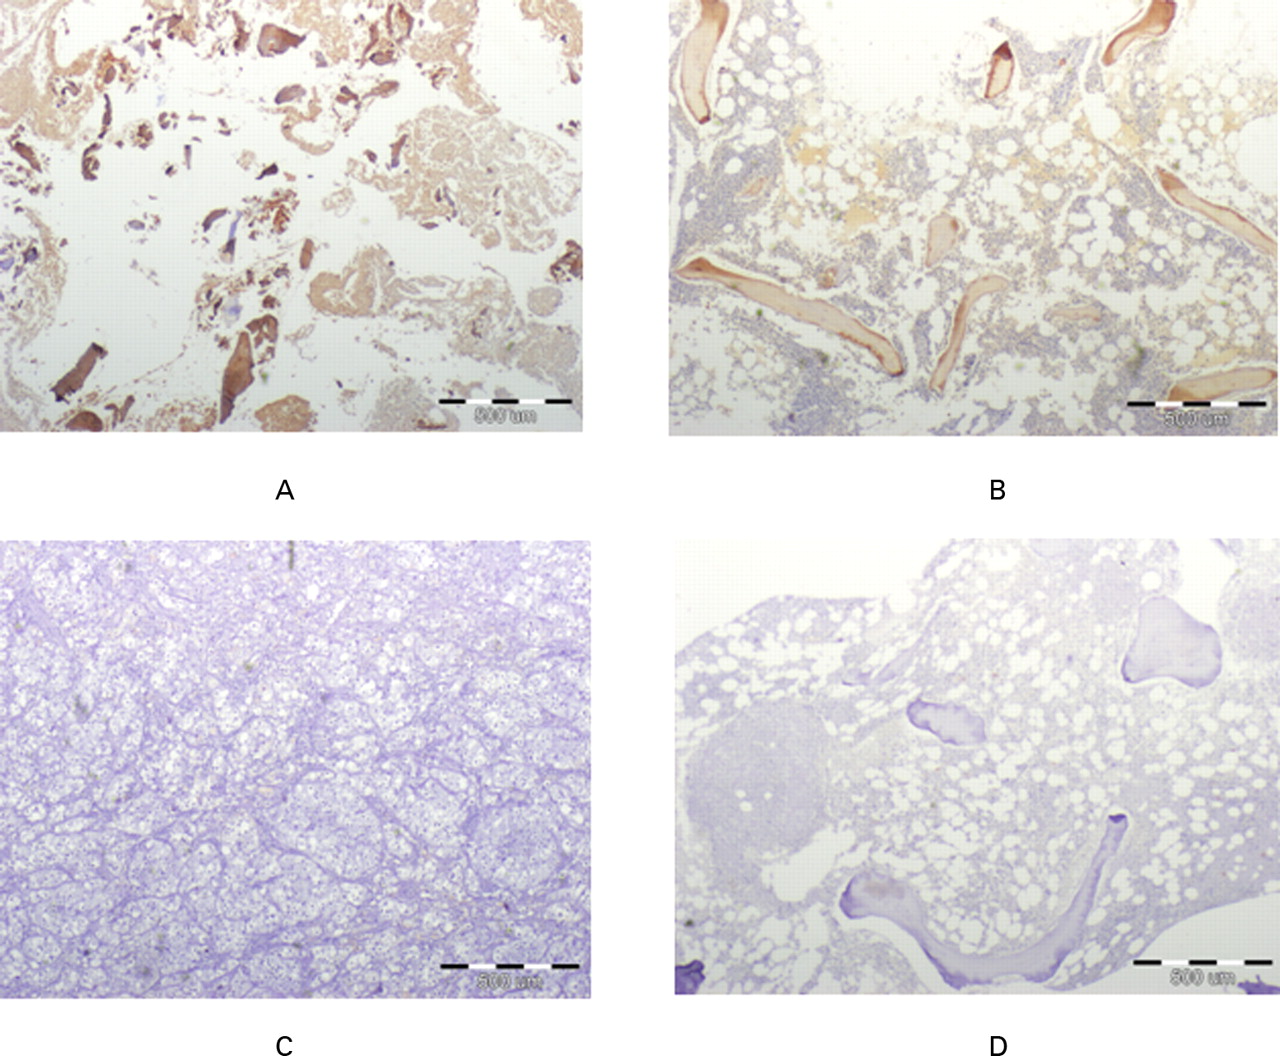 Fig. 6 
          Micrographs showing immunohistochemical staining
for osteocalcin (brown colour) in a) experimentally generated tissue, b)
normal cancellous bone (positive control), c) kidney (negative control)
and d) normal cancellous bone without antibody staining (not stained
negative control). Similar positive staining is evident in the generated
tissue and in normal bone sample. Negative controls show no staining
to osteocalcin.
        